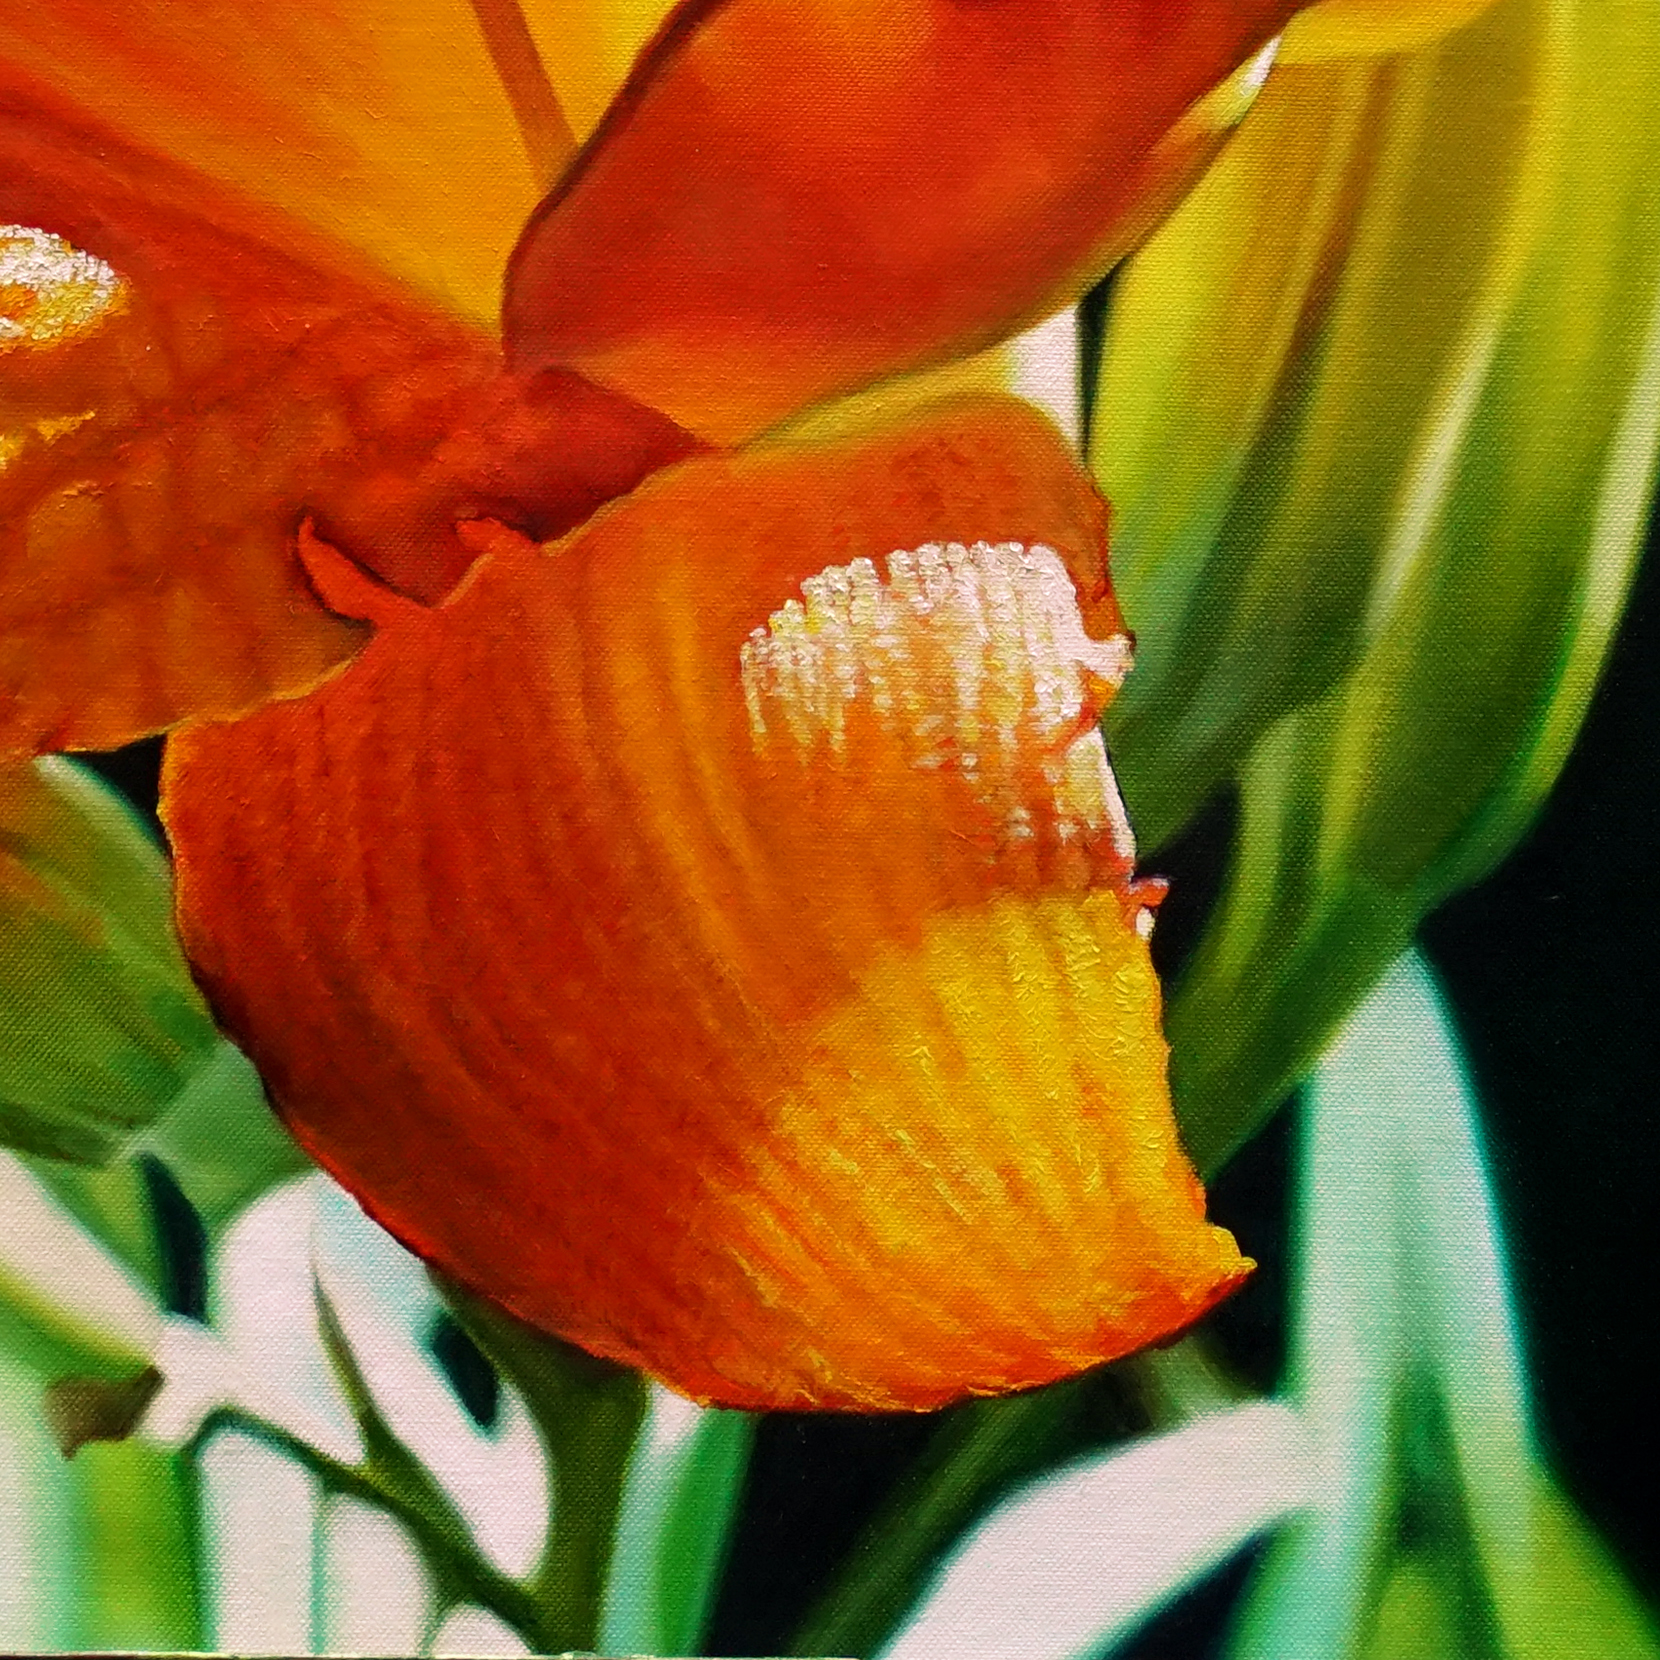 Still life with an orange lily. Painting, photorealism. Artist Anna Grechina.